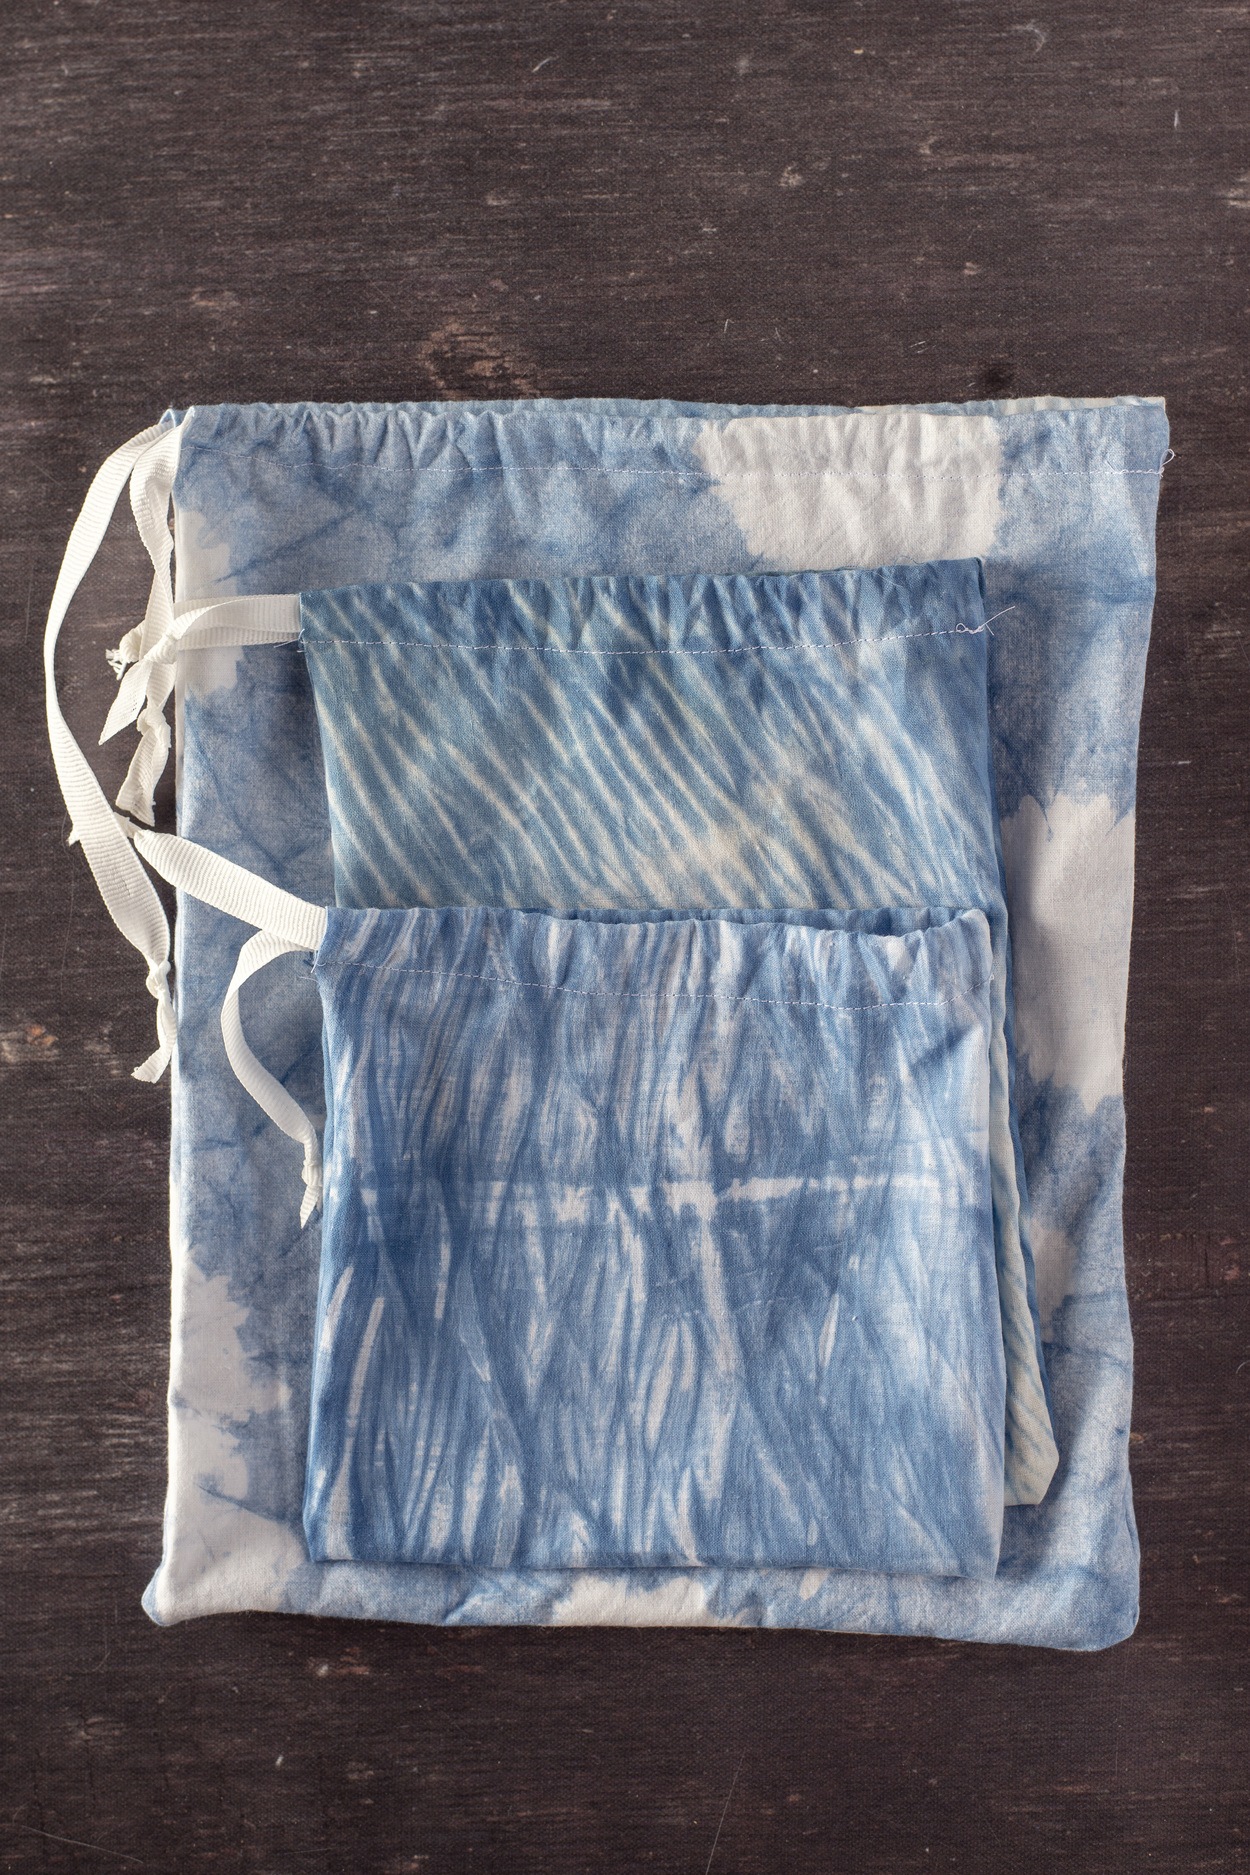 How To Make Your Own Reusable Produce Bags